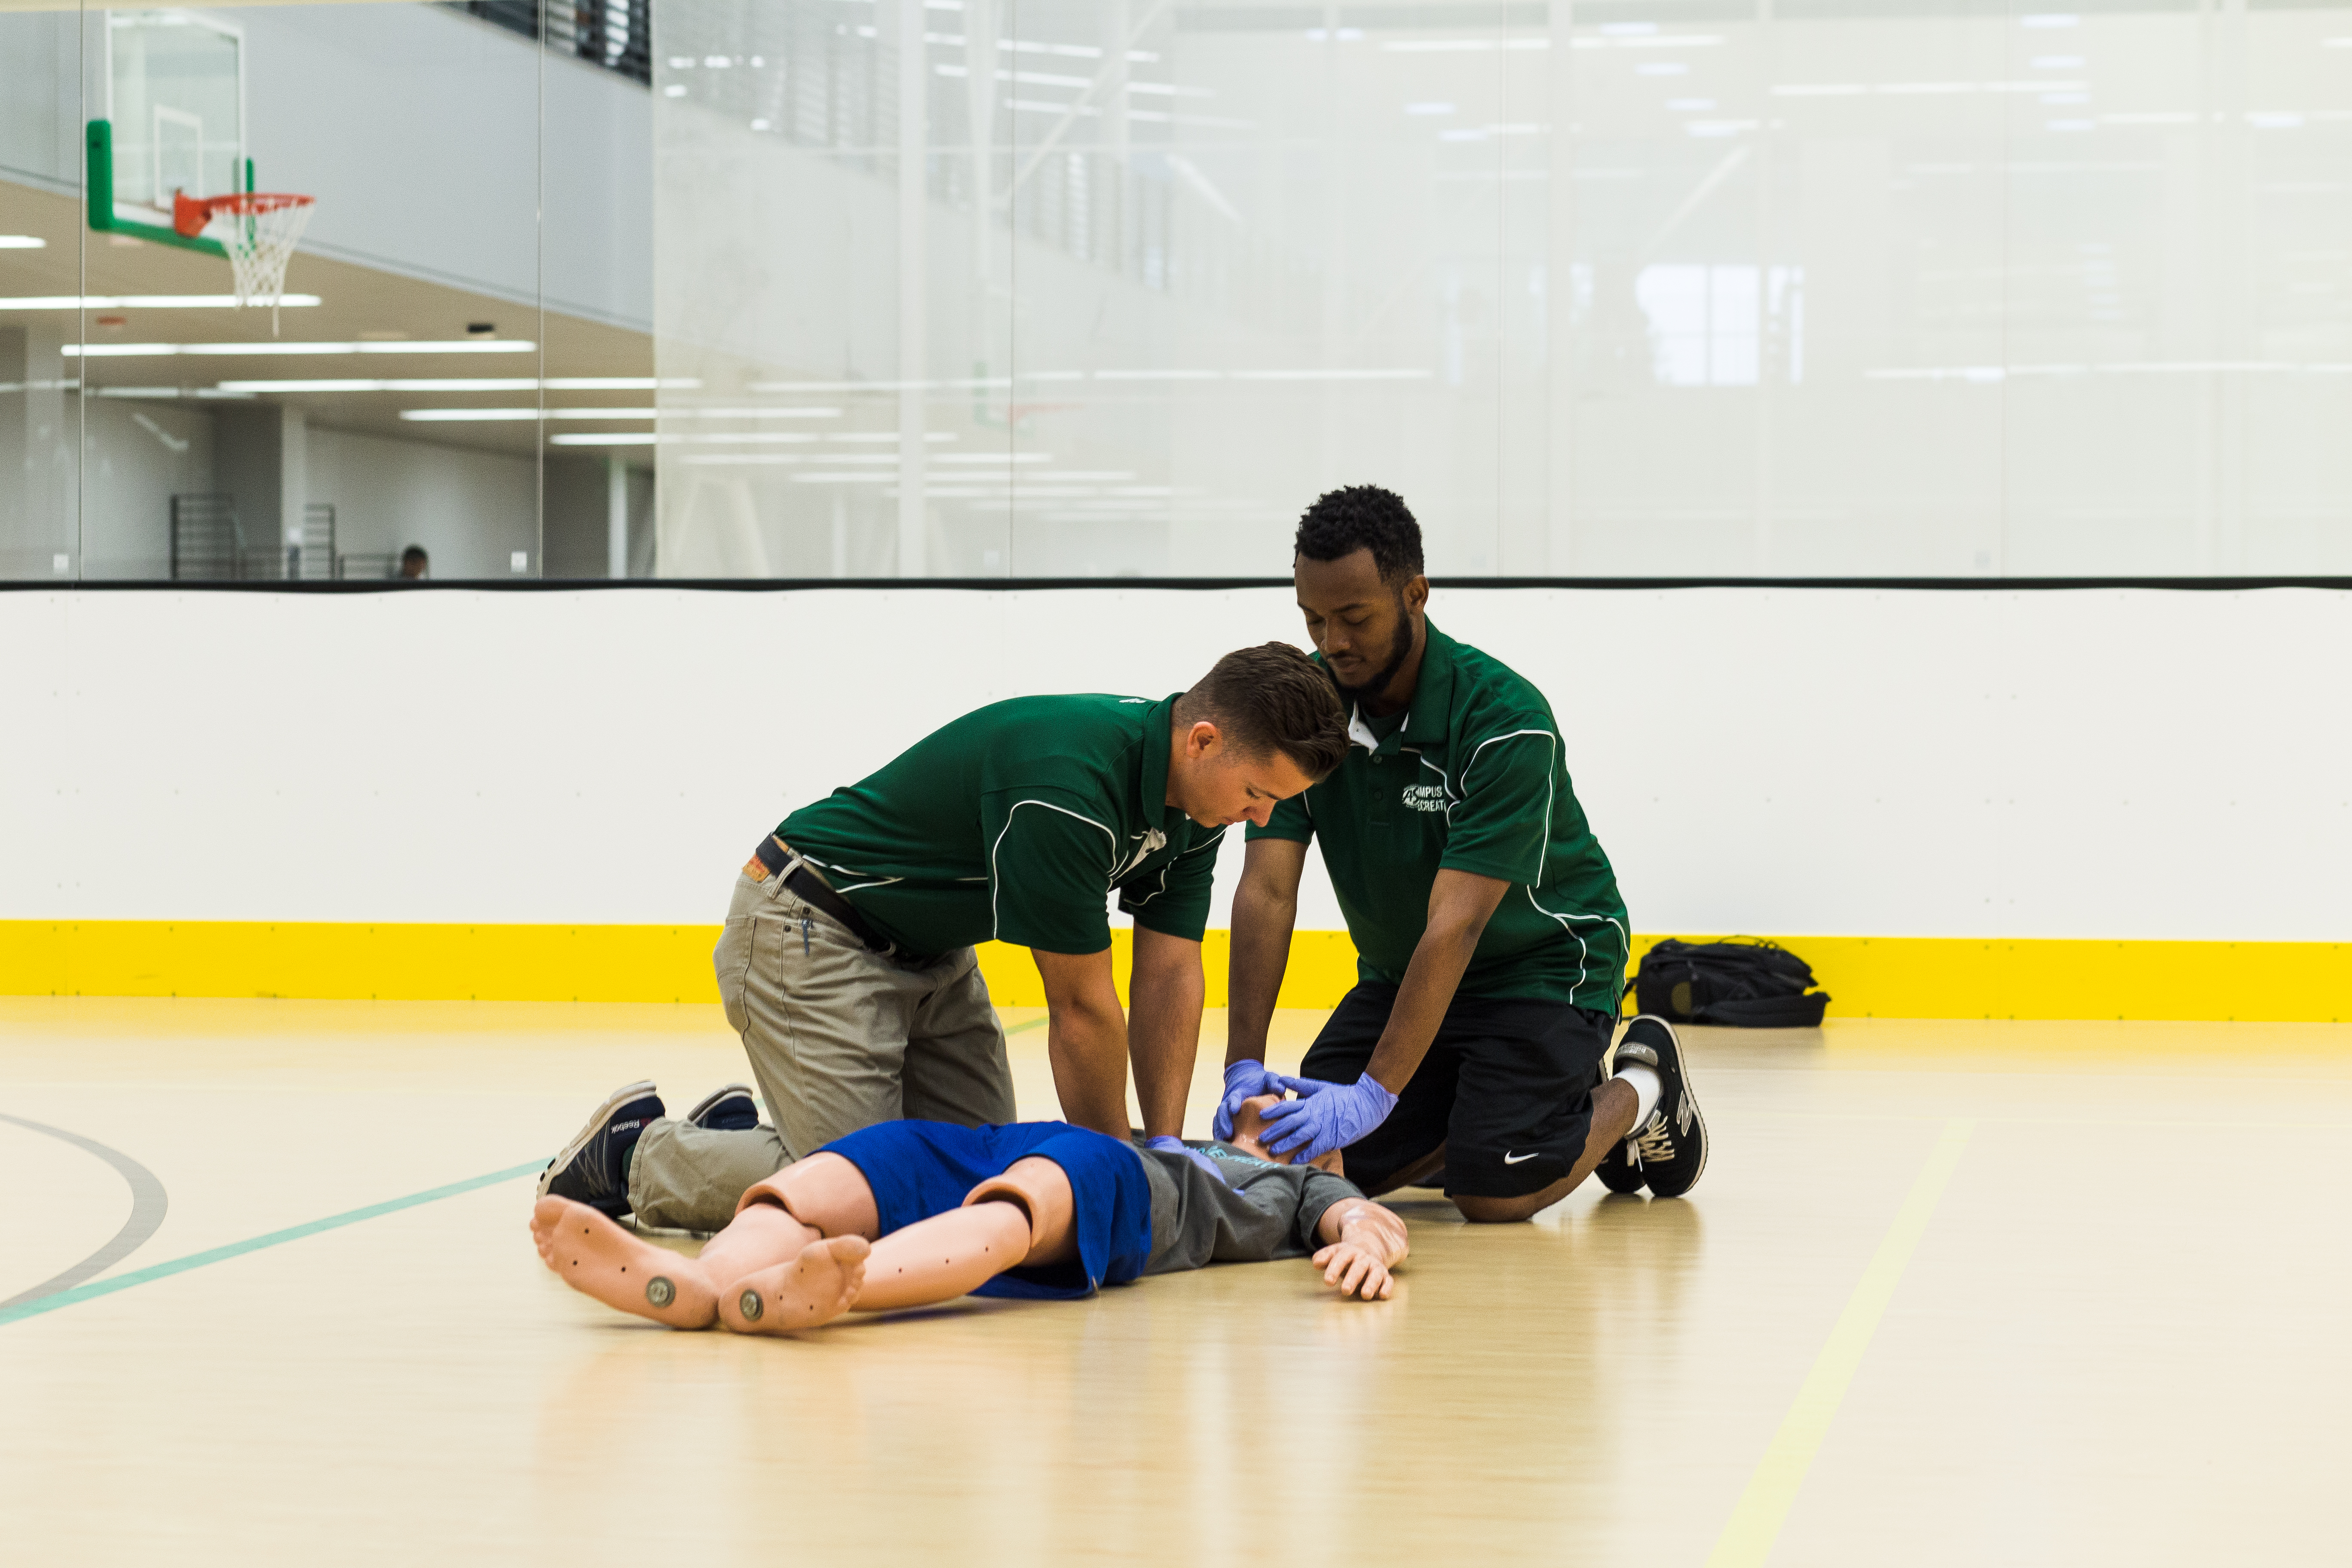 ASI student workers performing CPR on a practice dummy